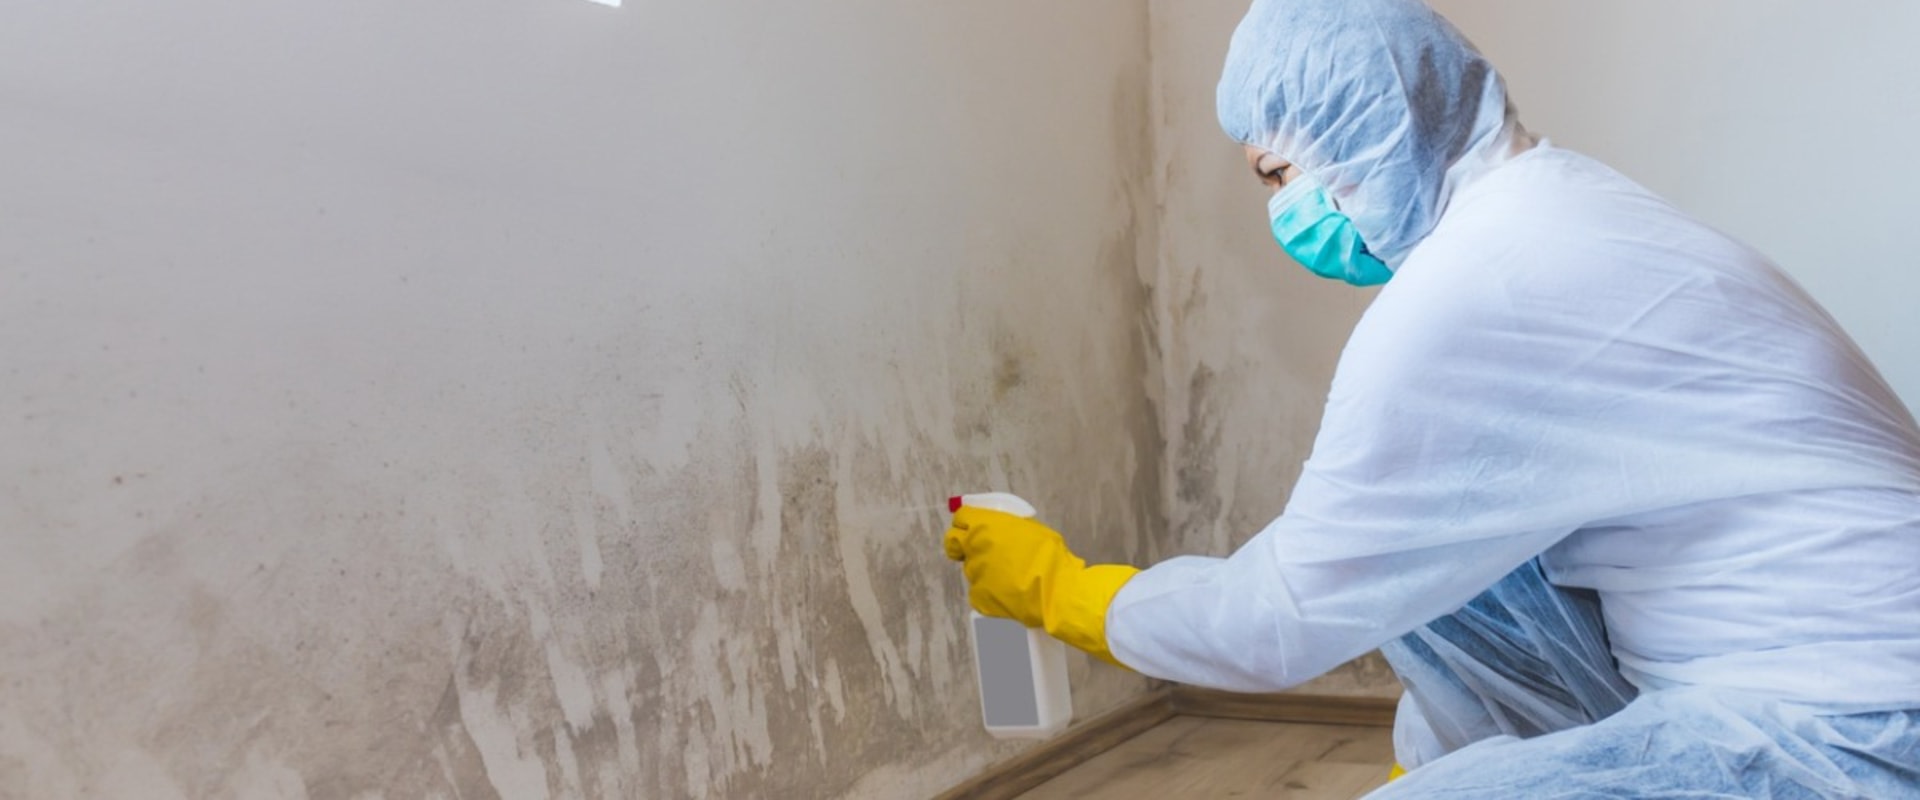 The Ultimate Guide To Mold Remediation And Inspection Services In Hollywood, FL